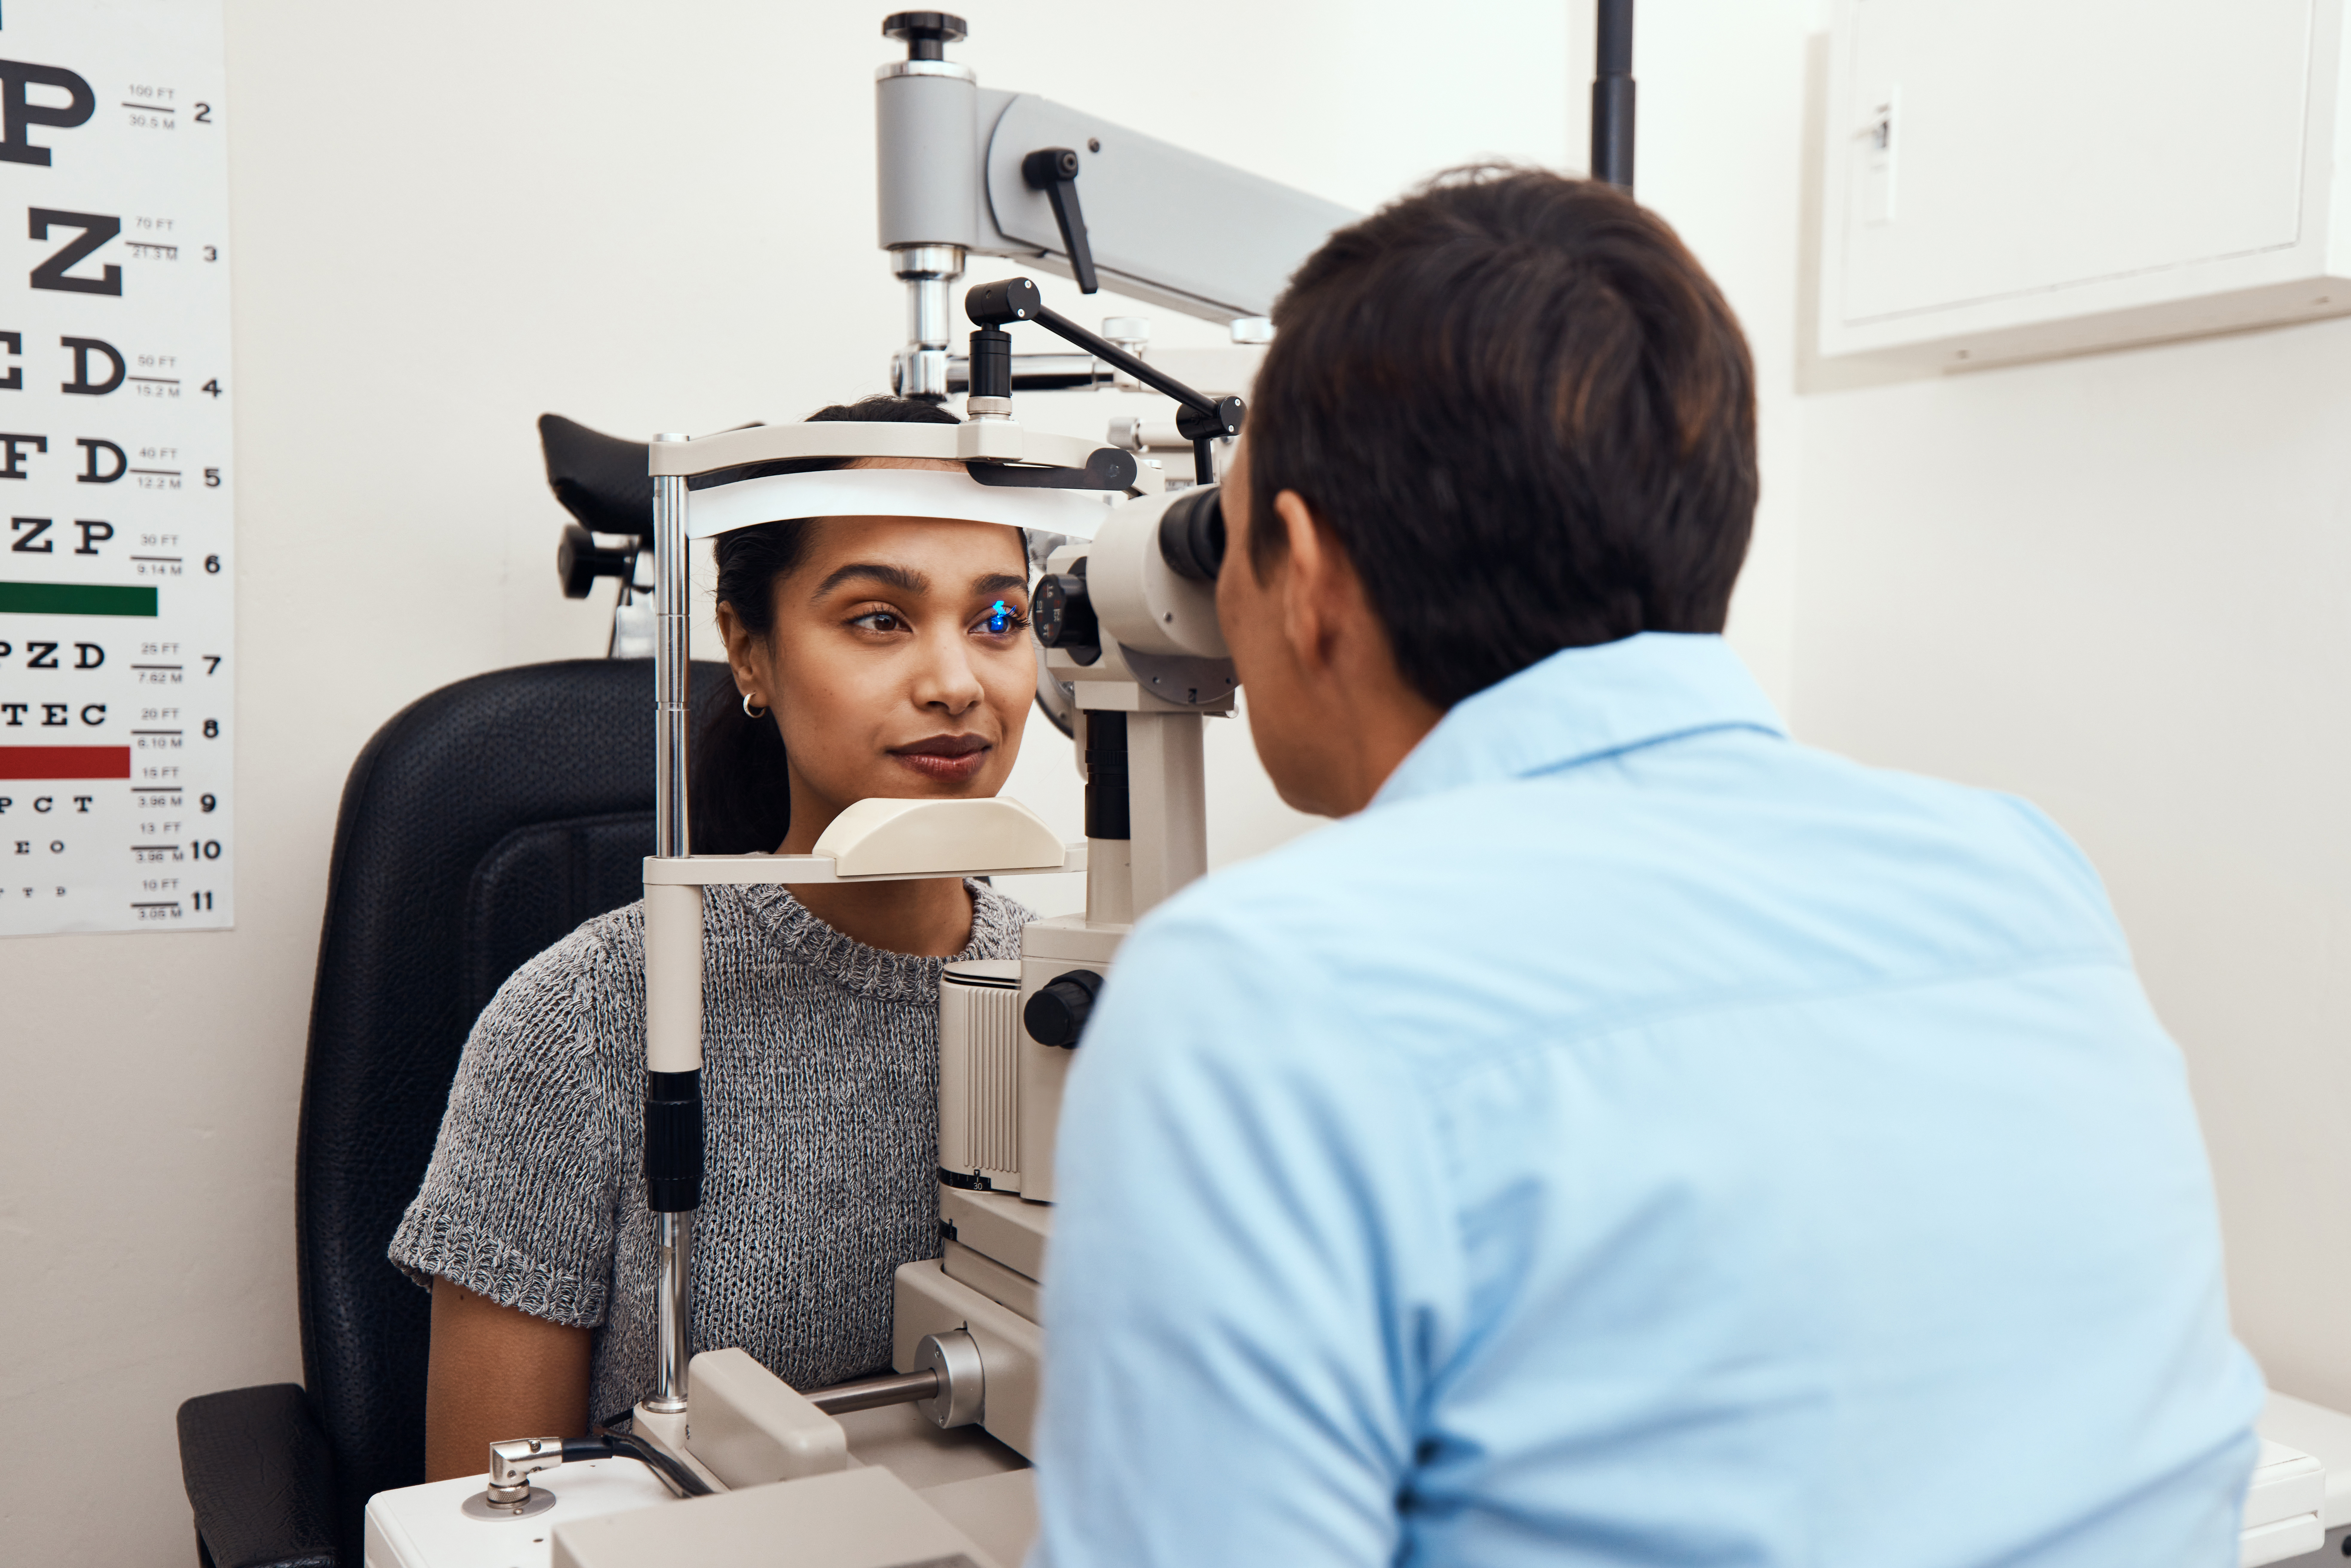 Can’t see Come to me. Shot of a young woman getting her eyes examined with a slit lamp by an optometrist.